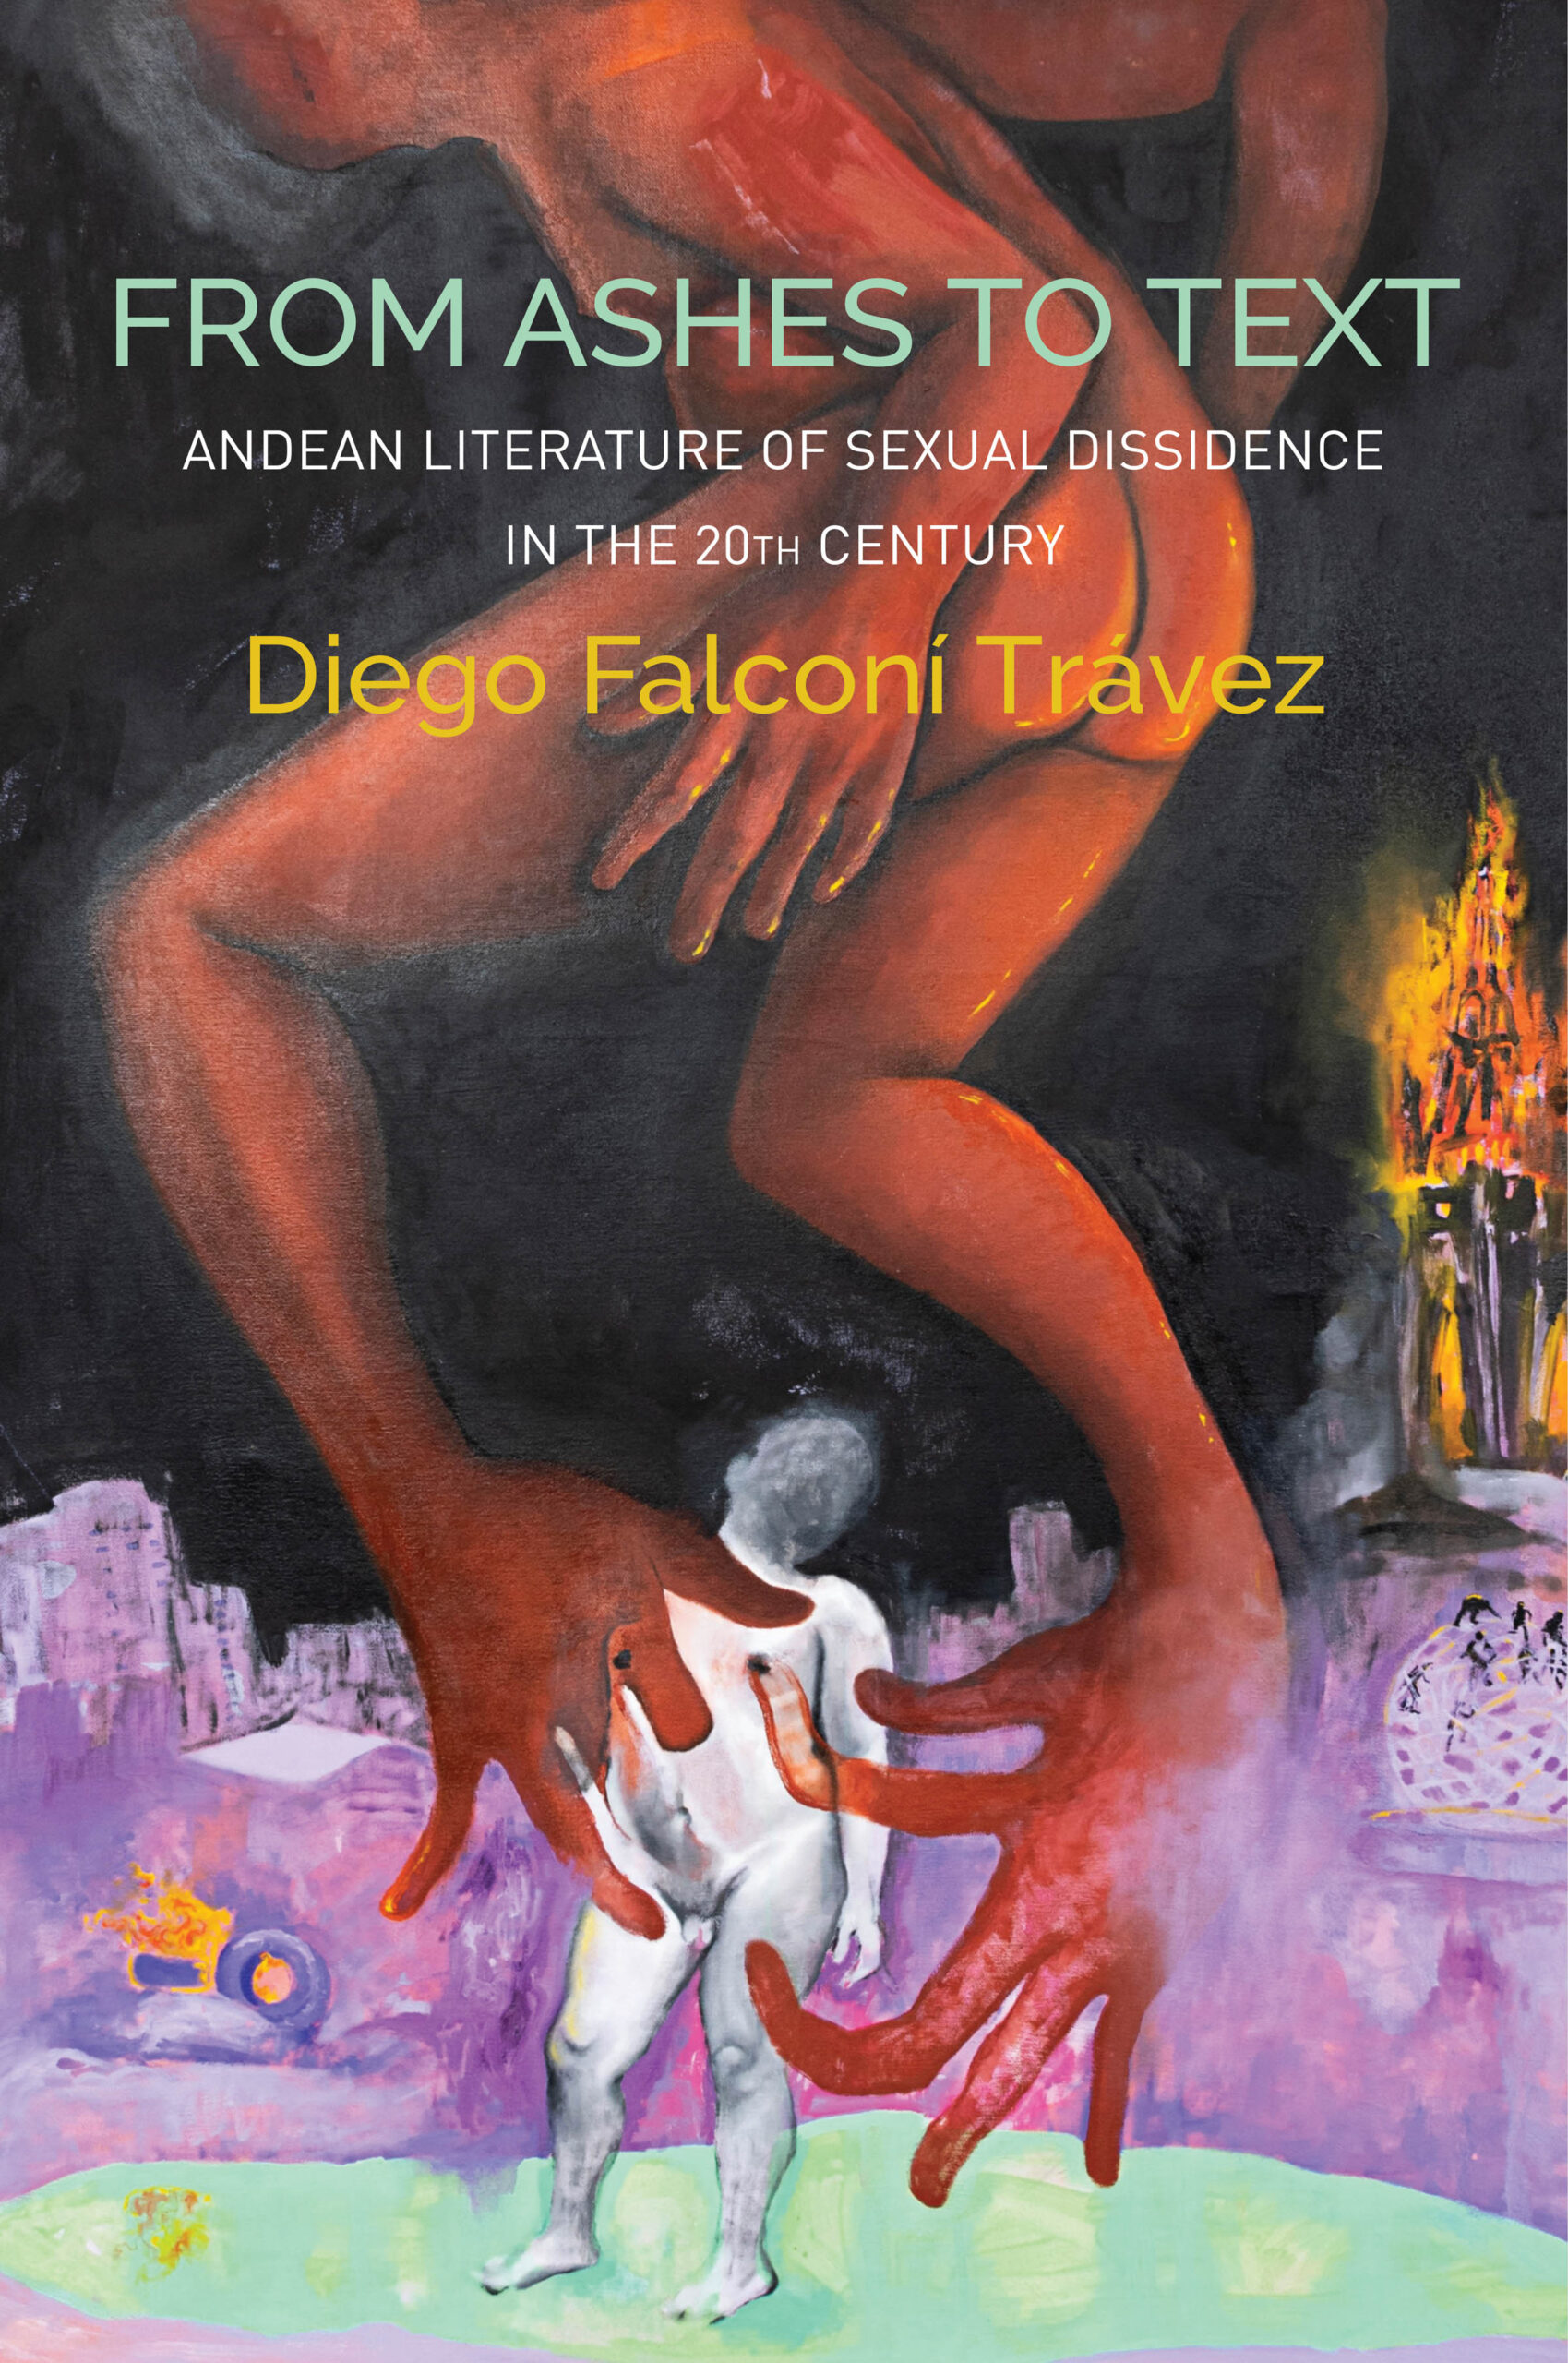 Conversation on From Ashes to Text: Andean Literature of Sexual Dissidence in the 20th Century